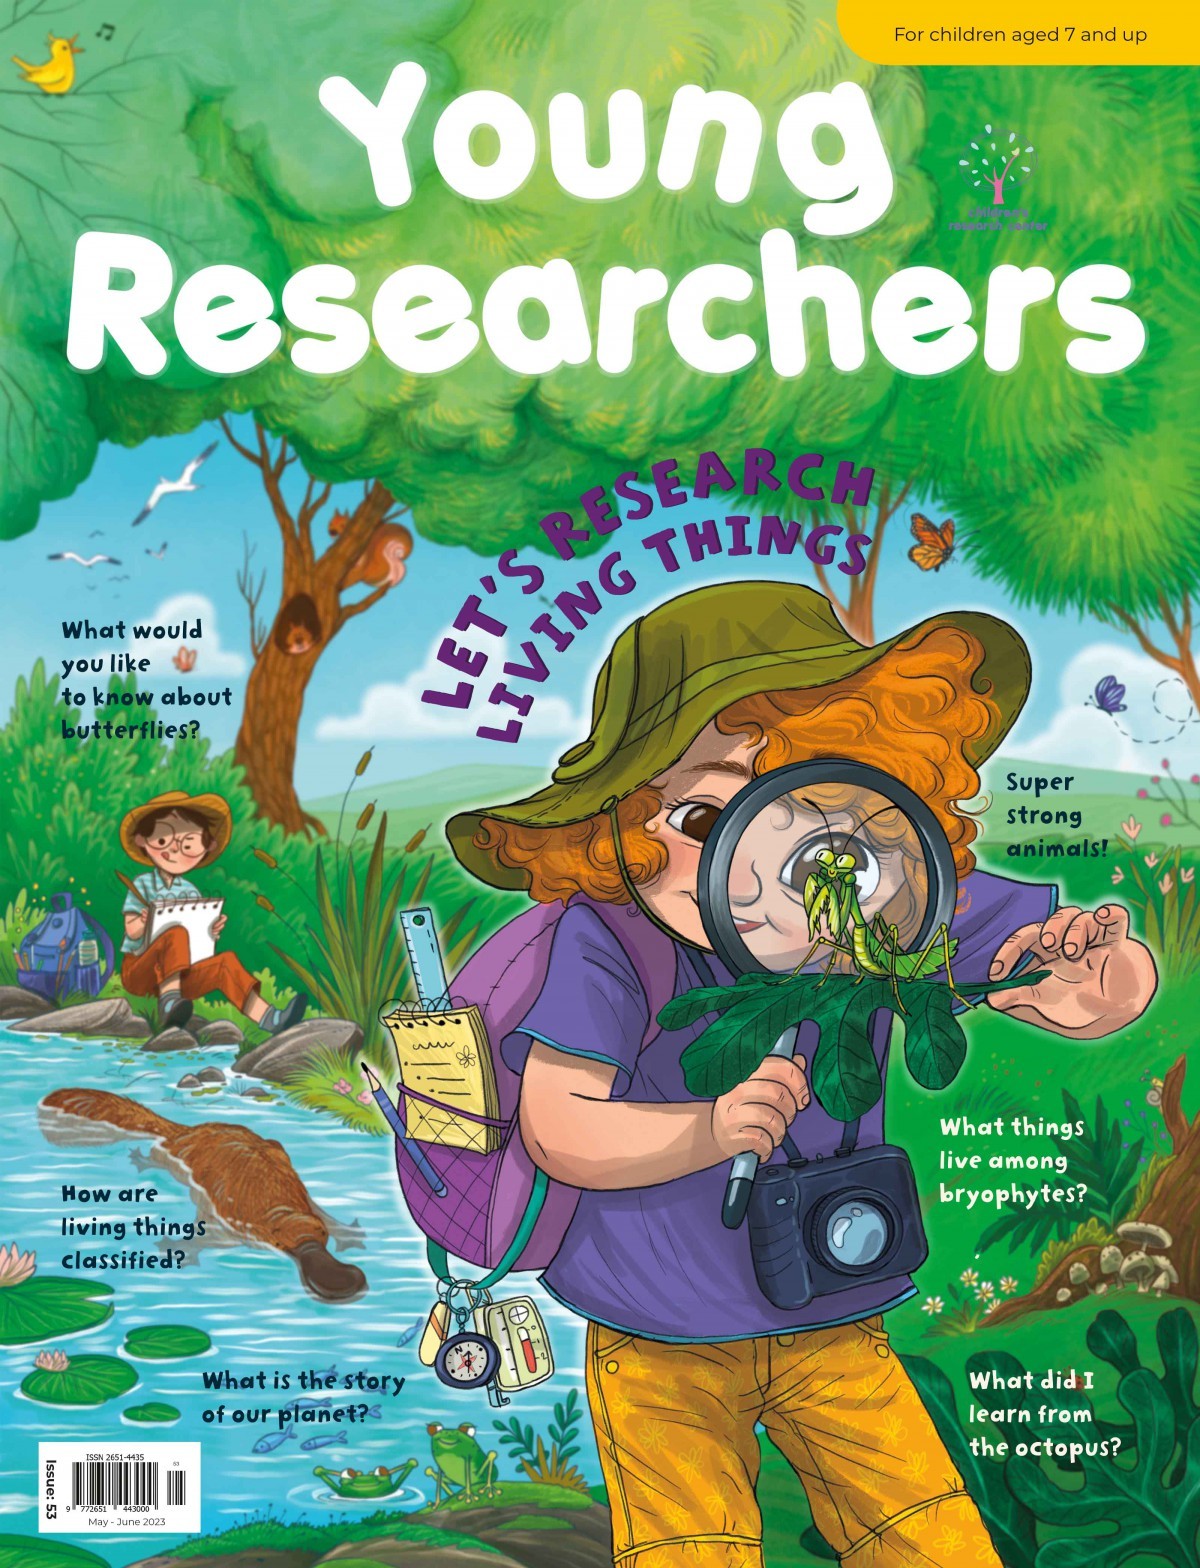 Young Researchers Issue 53: Let's Research Living Things